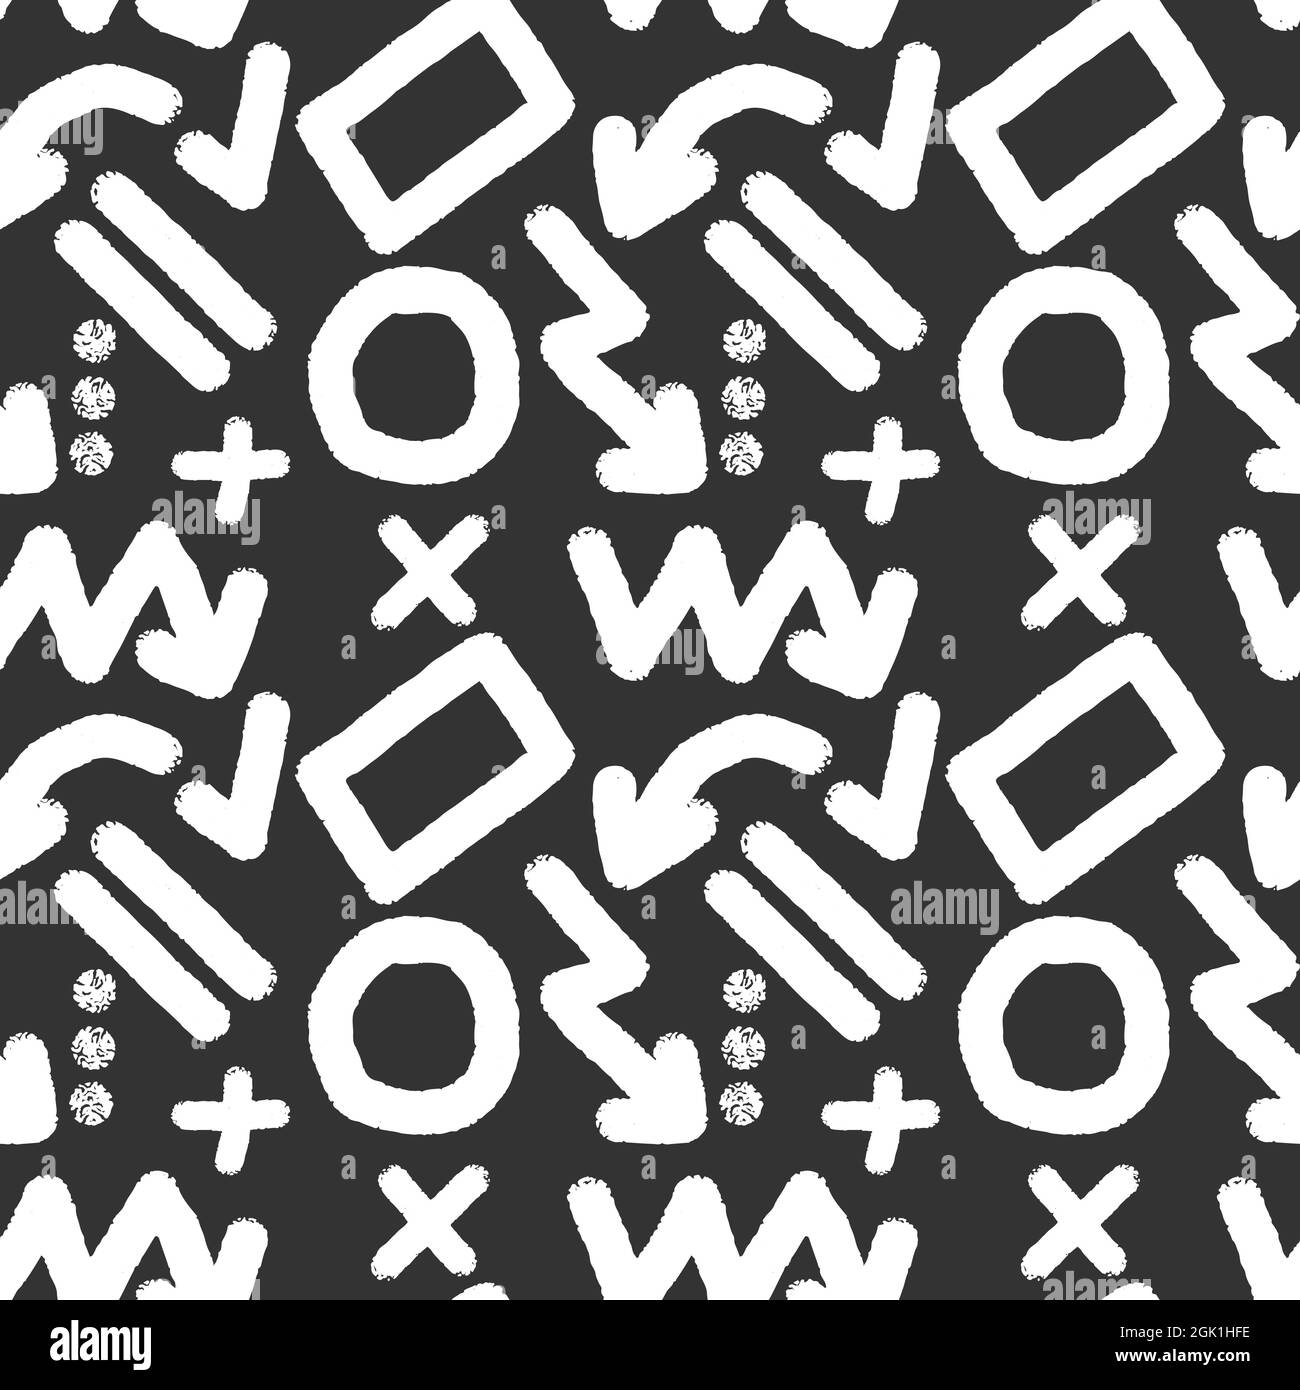 White marker elements seamless patern. Set of highlighter simbols, shapes and arrows vector illustration. Isolated on black background Stock Vector